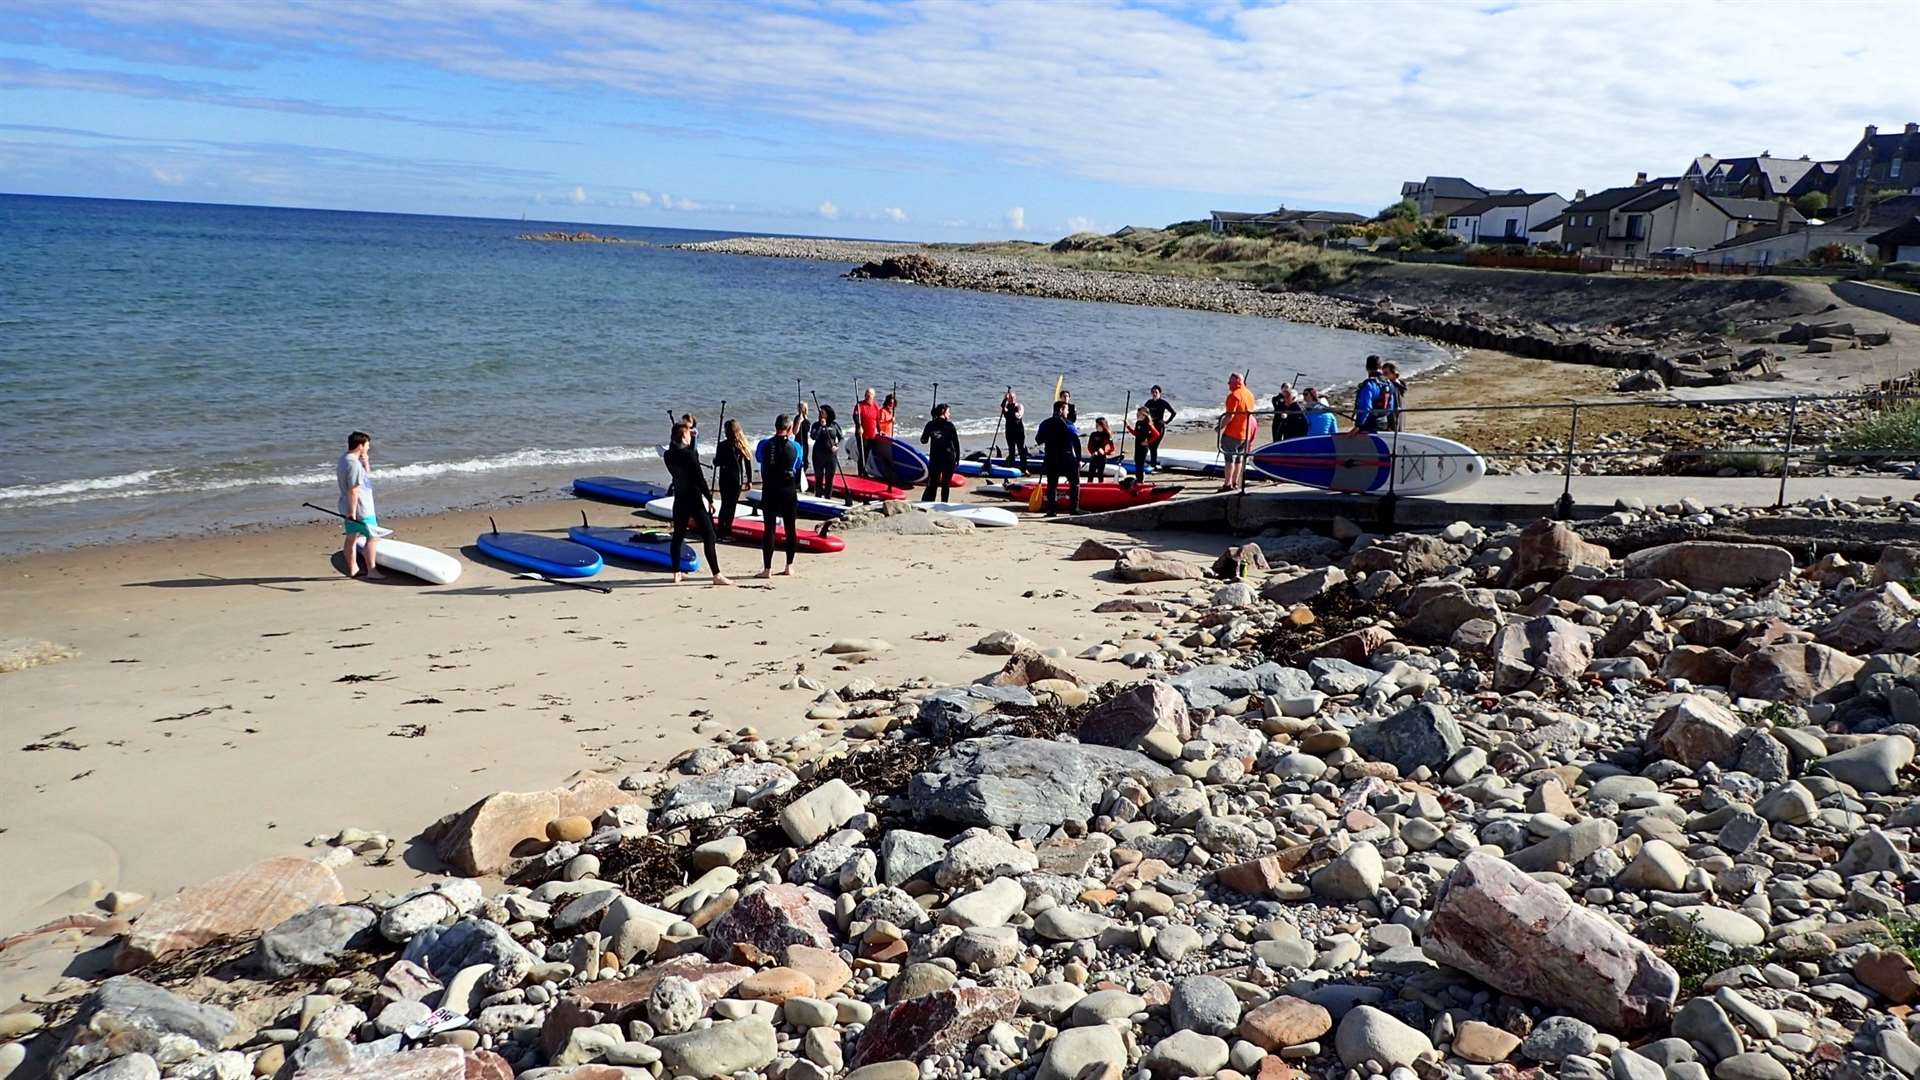 Moray SUP Club is organising a Paddle Against Plastic in Lossiemouth this month.